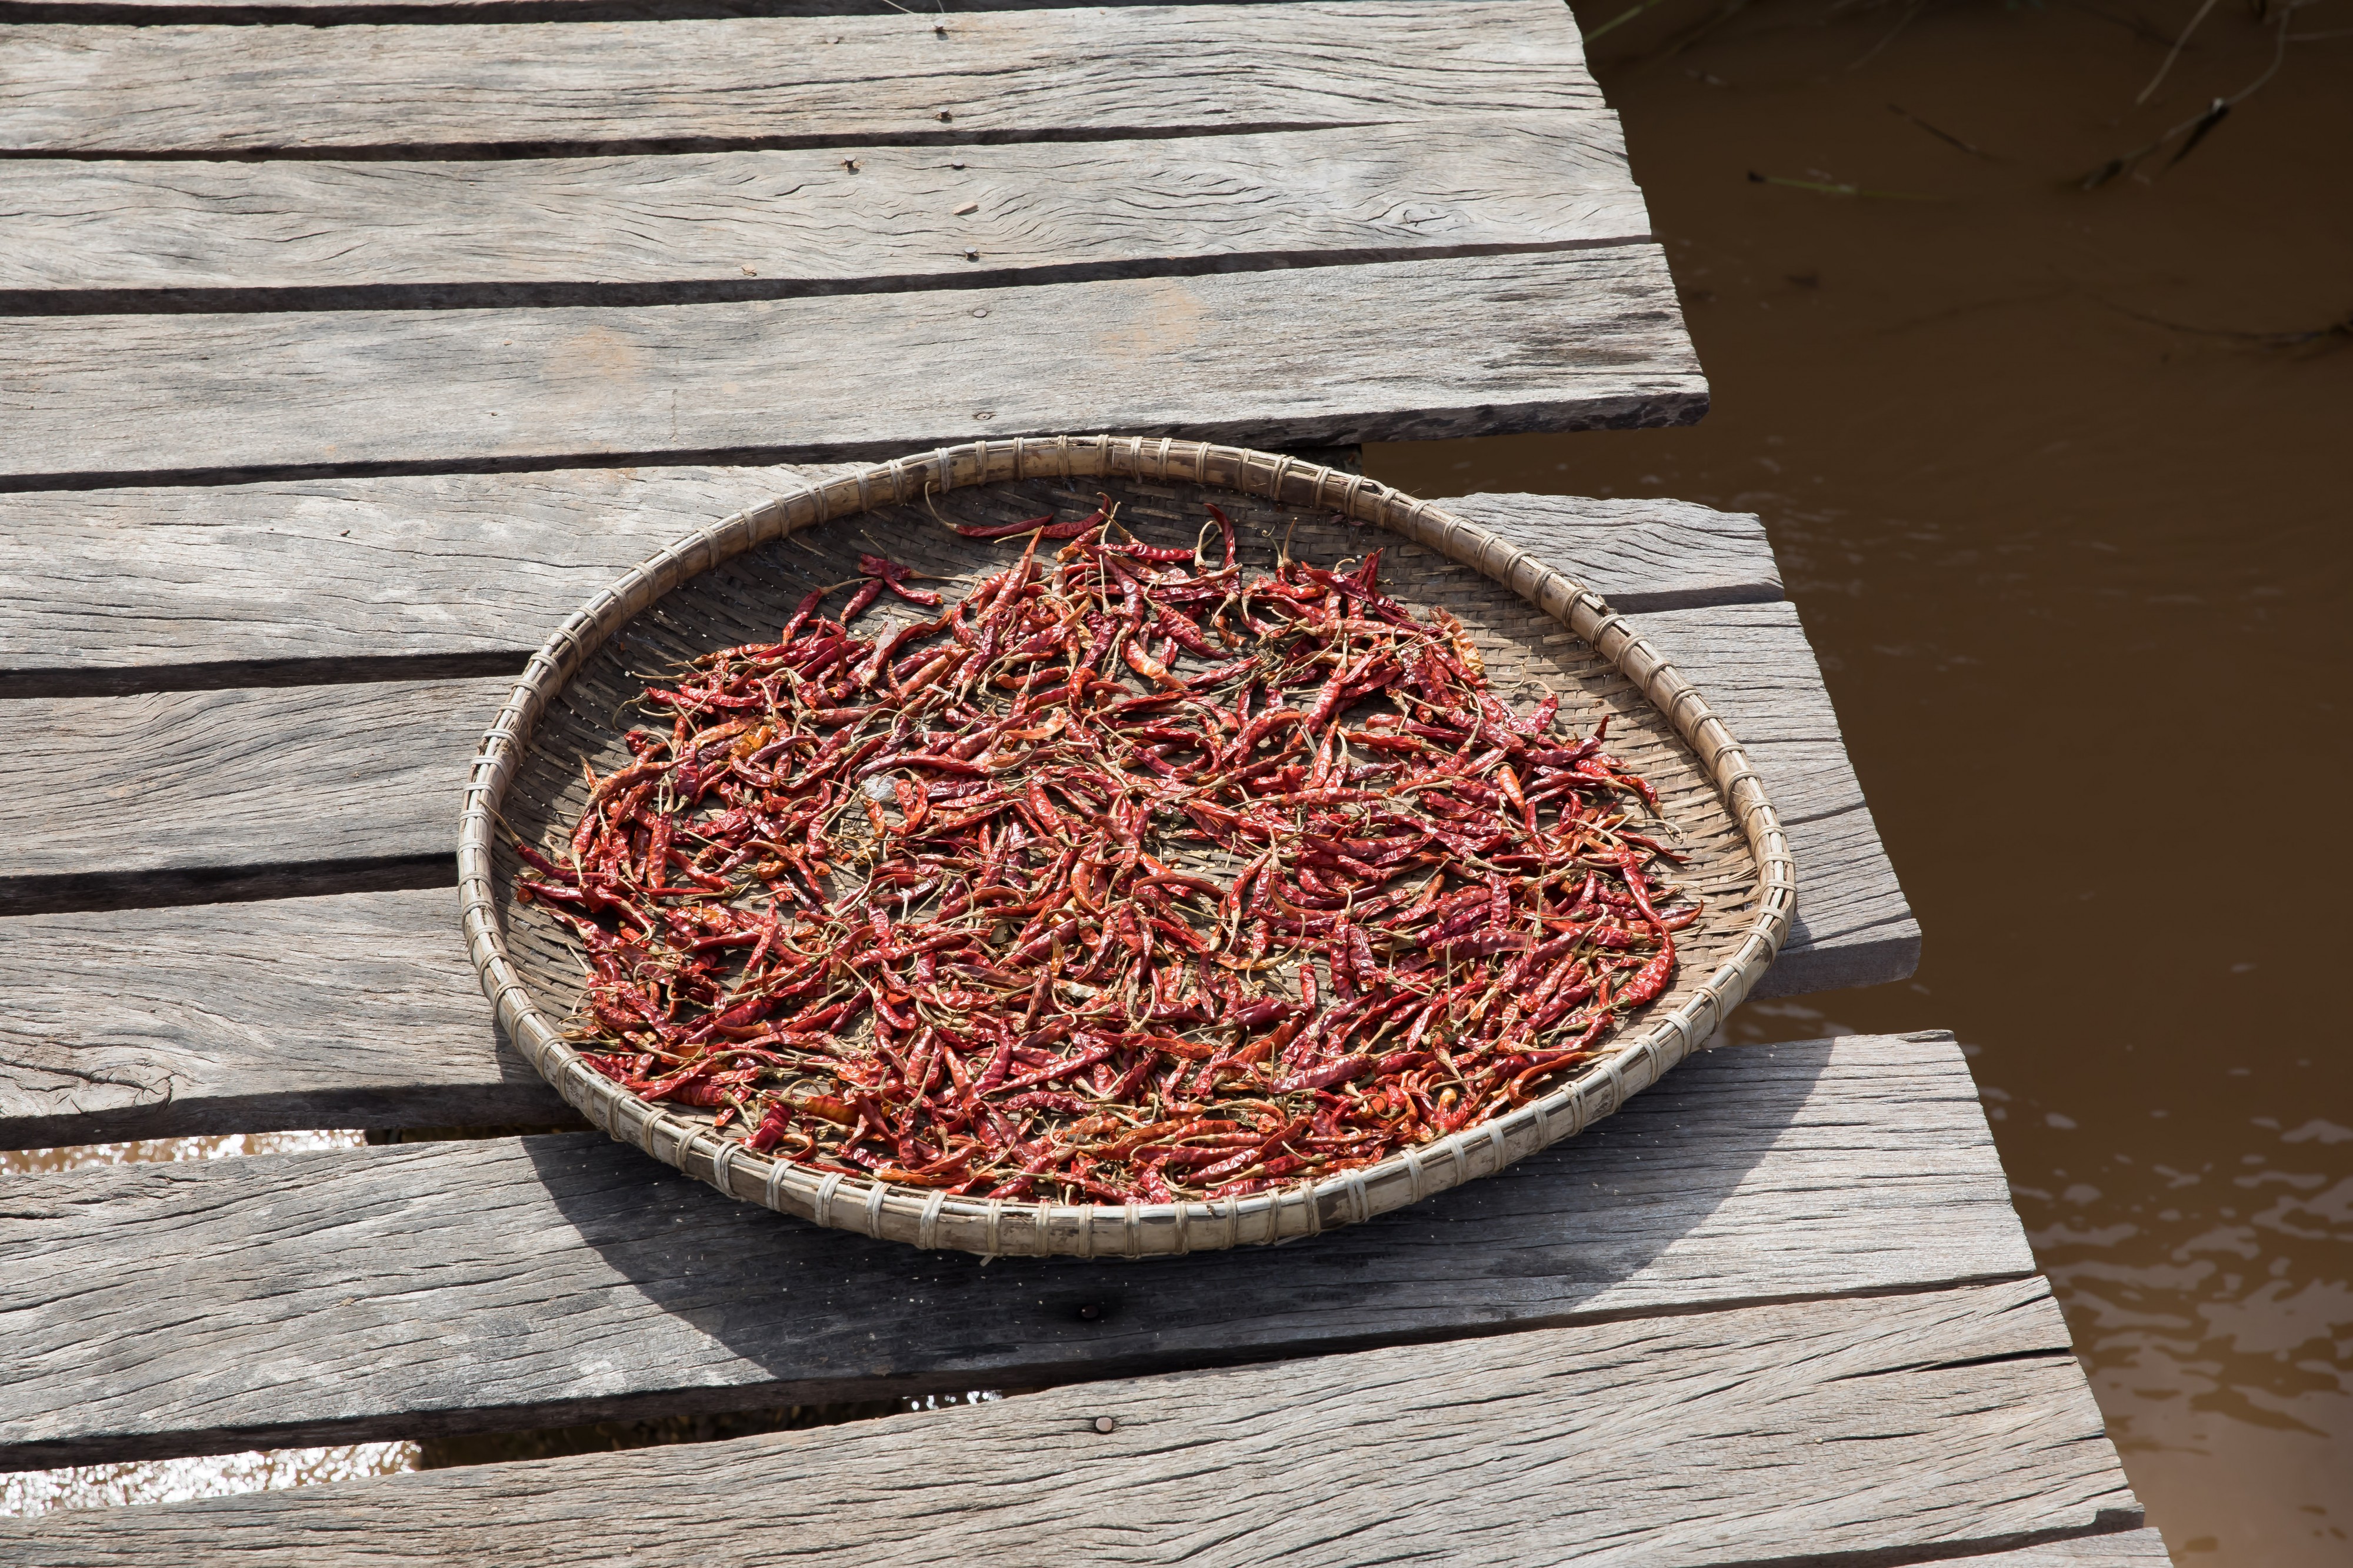 Red chili peppers drying on a footbridge